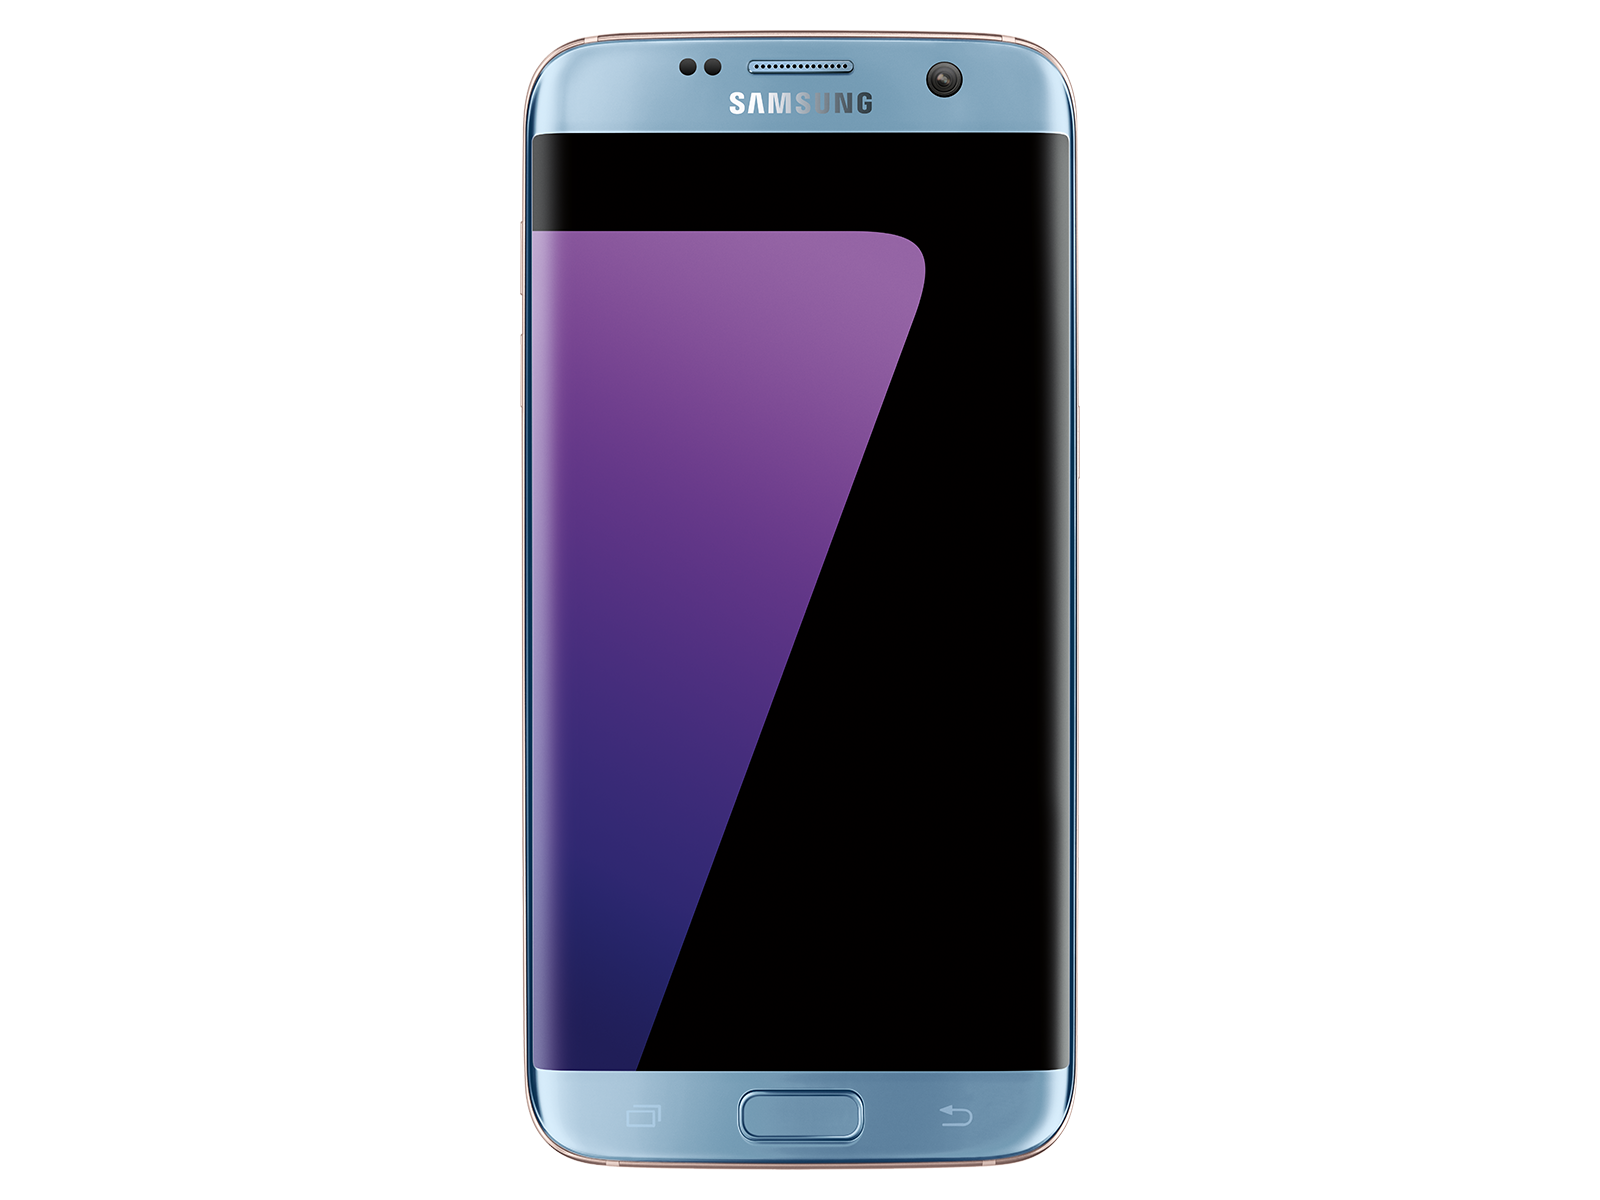 Galaxy S7 Edge Sm G935v Support Manual Samsung Business